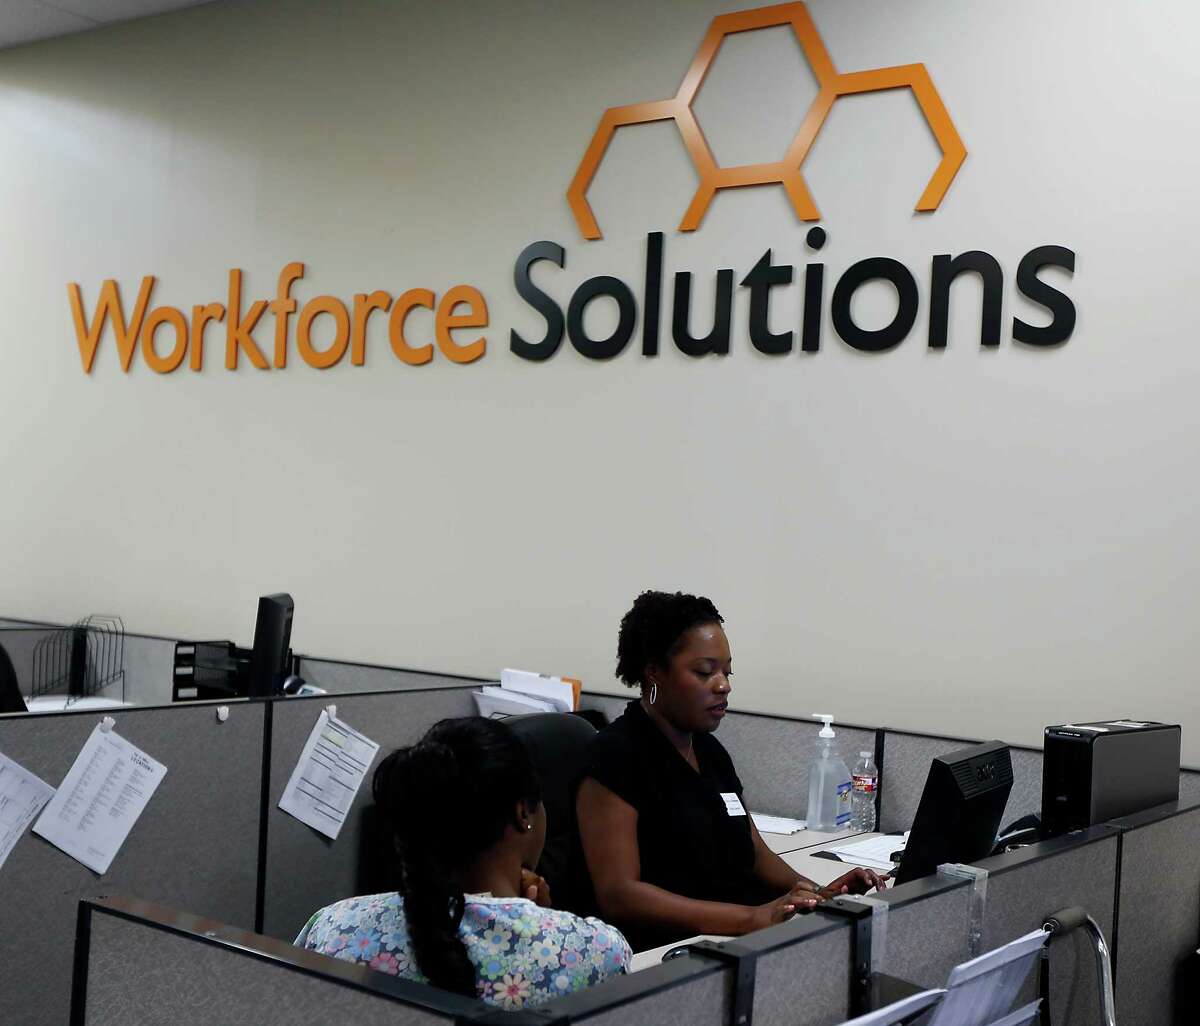 The downturn in the economy has kept Gulf Coast Workforce Solutions, at least, busier than usual.